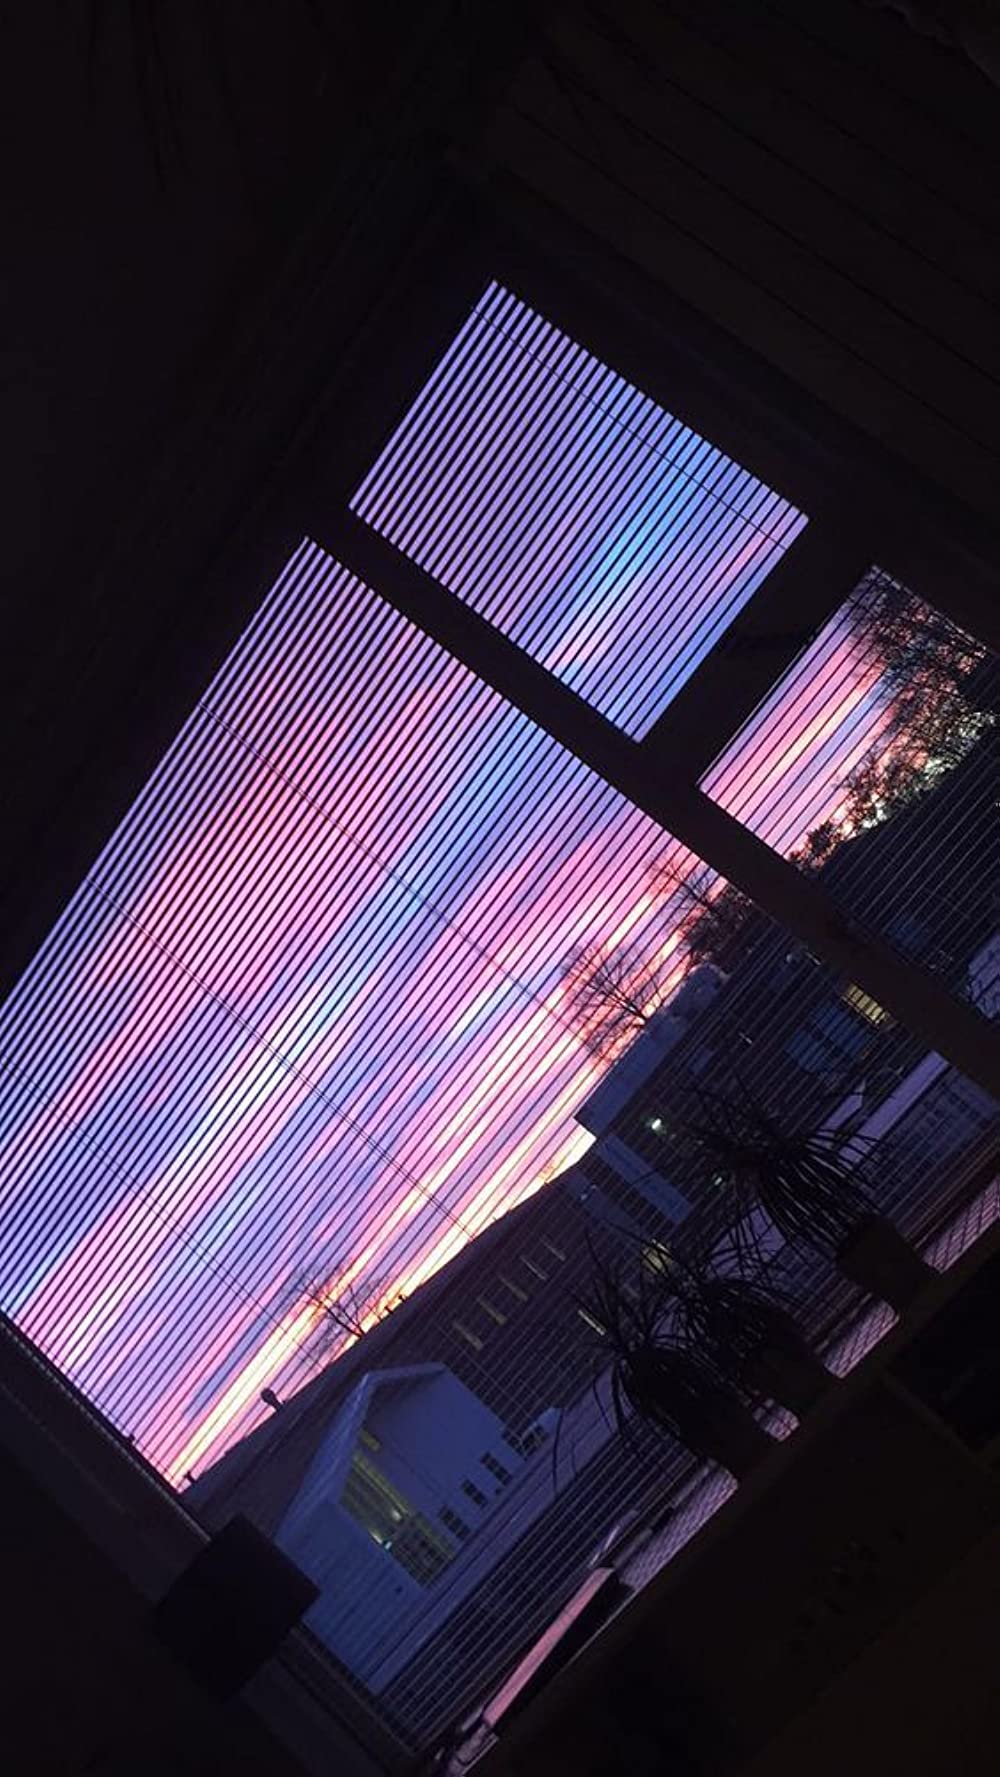 A skylight at night with a purple and blue sunset - School